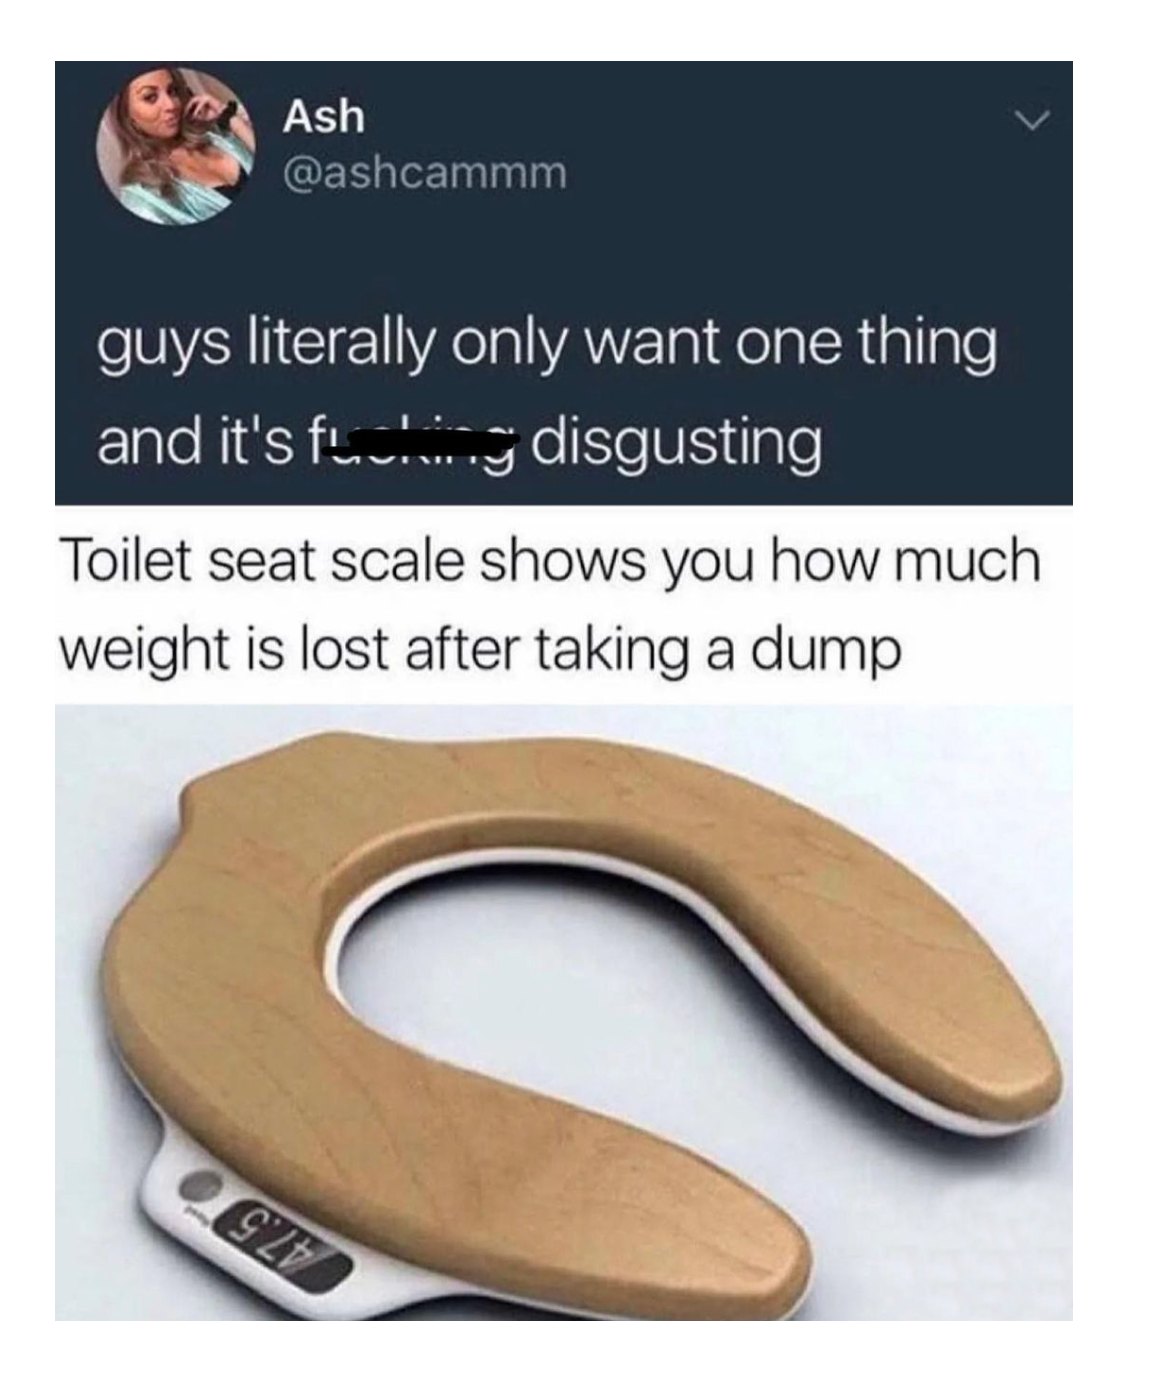 guys literally only want one thing and it's fucking disgusting, toilet seat scale shows you how much weight is lost after taking a dump, lol